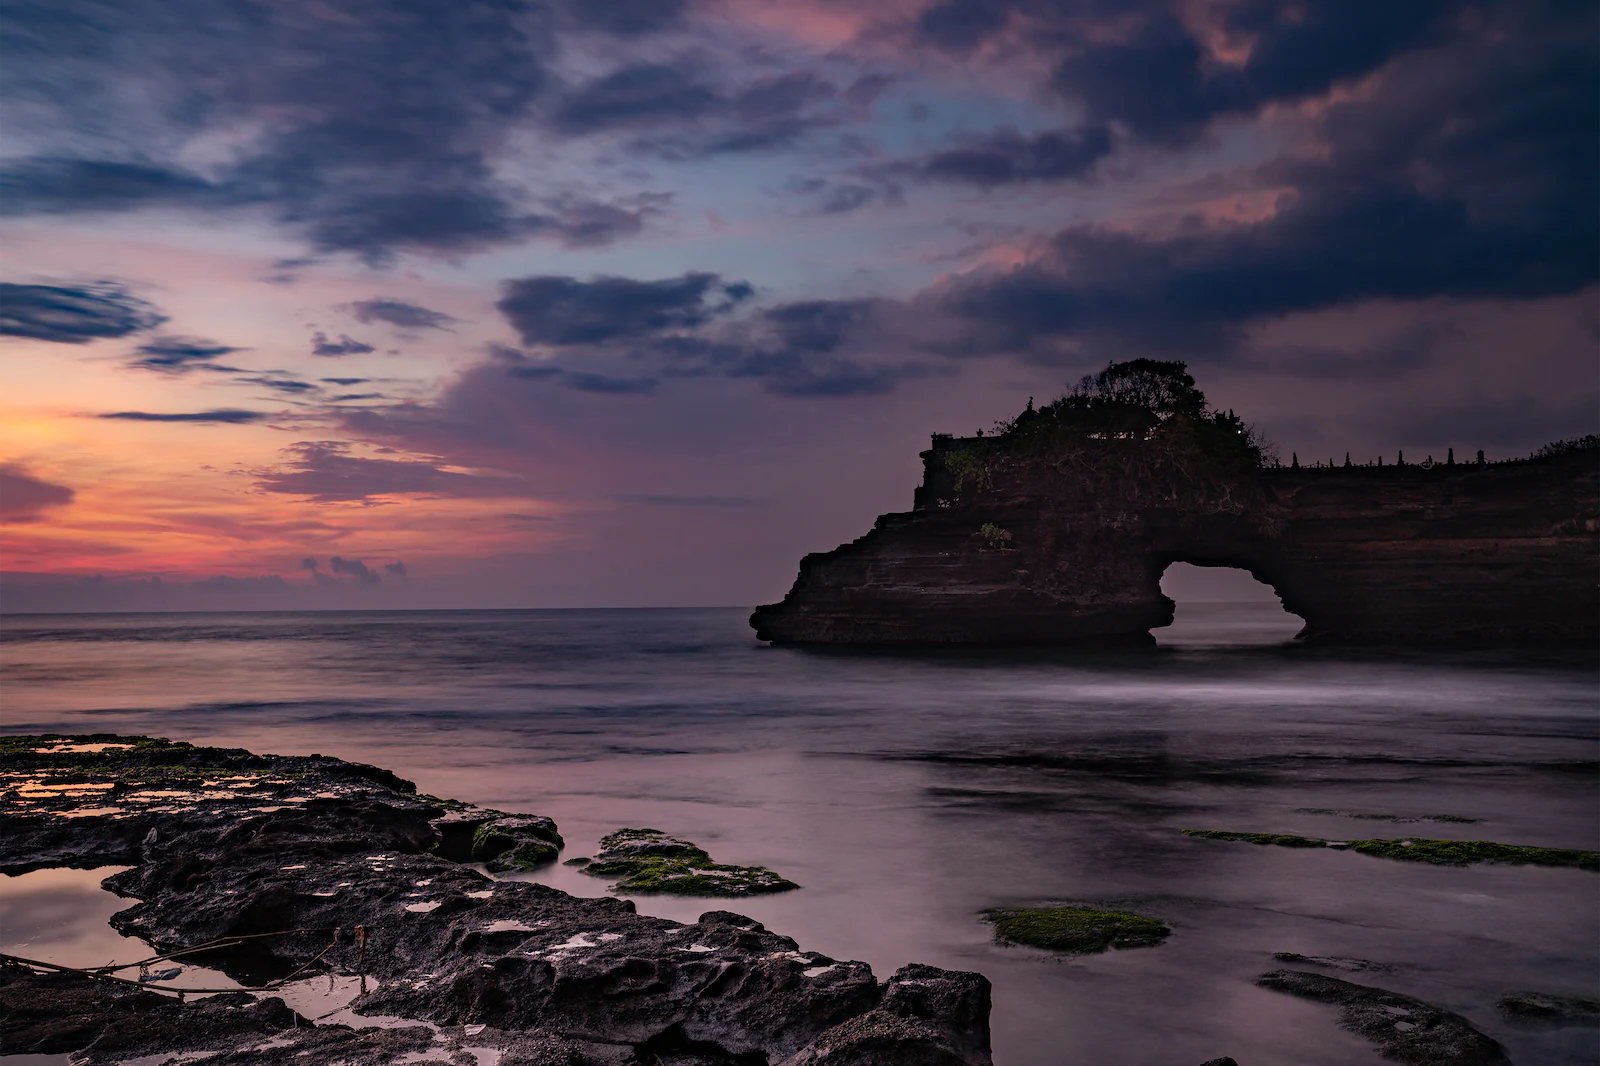 Purple sunset by the sea in Bali